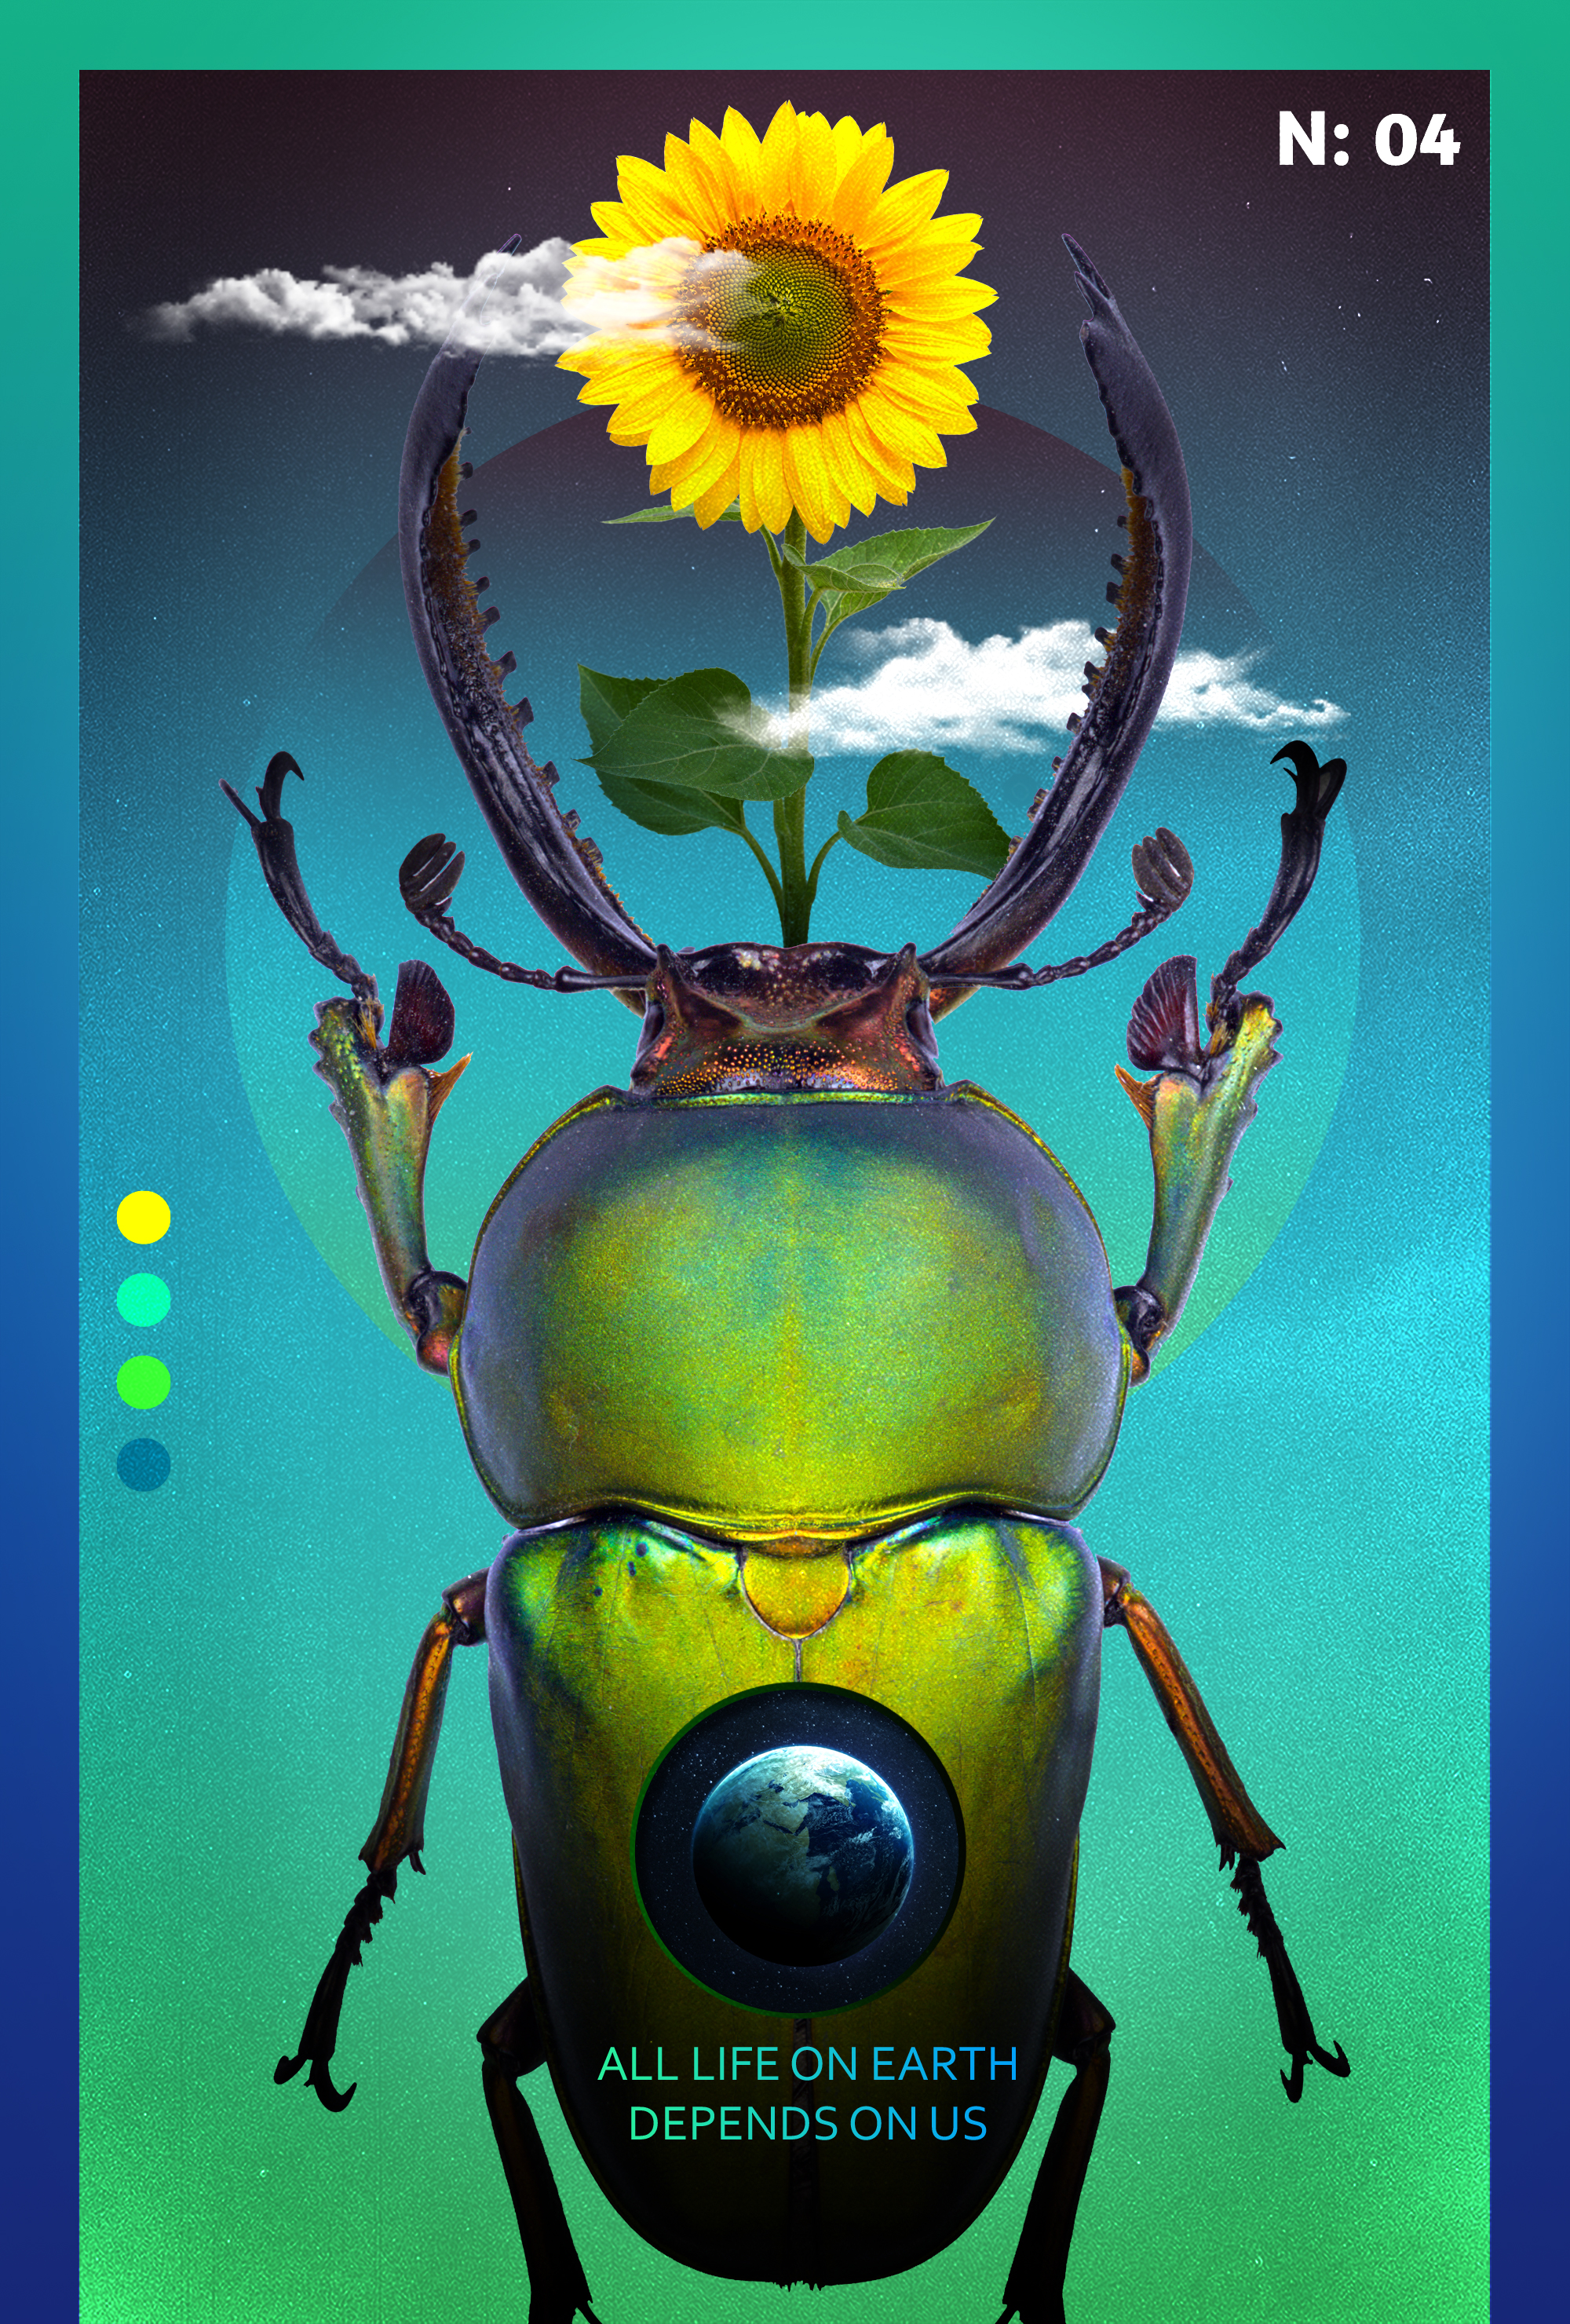 General 2000x2960 globes insect photoshopped beetles clouds digital art portrait display text motivational